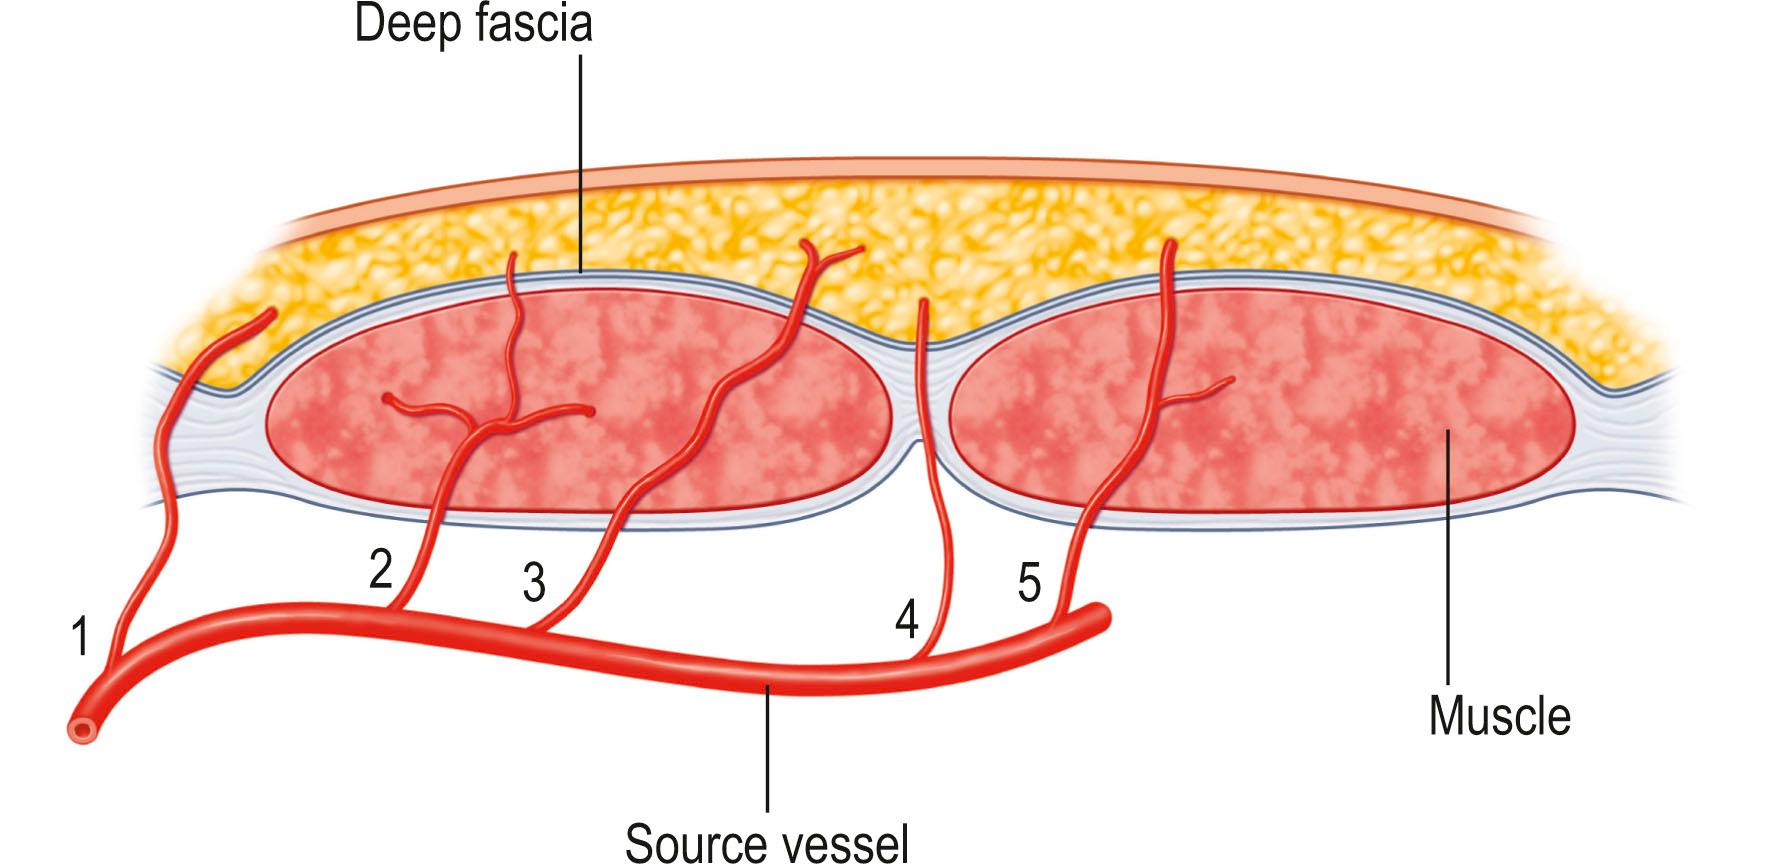 Figure 24.20, The different types of direct and indirect perforator vessels with regard to their surgical importance. 1, Direct perforators perforate the deep fascia only; 2, indirect muscle perforators predominantly supply the subcutaneous tissues; 3, indirect muscle perforators predominantly supply the muscle but have secondary branches to the subcutaneous tissues; 4, indirect perimysial perforators travel within the perimysium between muscle fibers before piercing the deep fascia; 5, indirect septal perforators travel through the intermuscular septum before piercing the deep fascia.